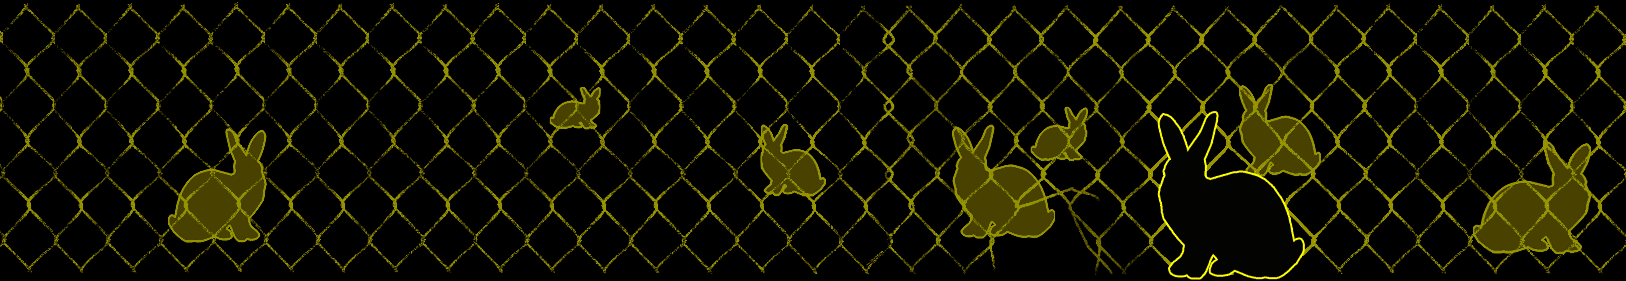 rabbitprooffence_by_12.gif